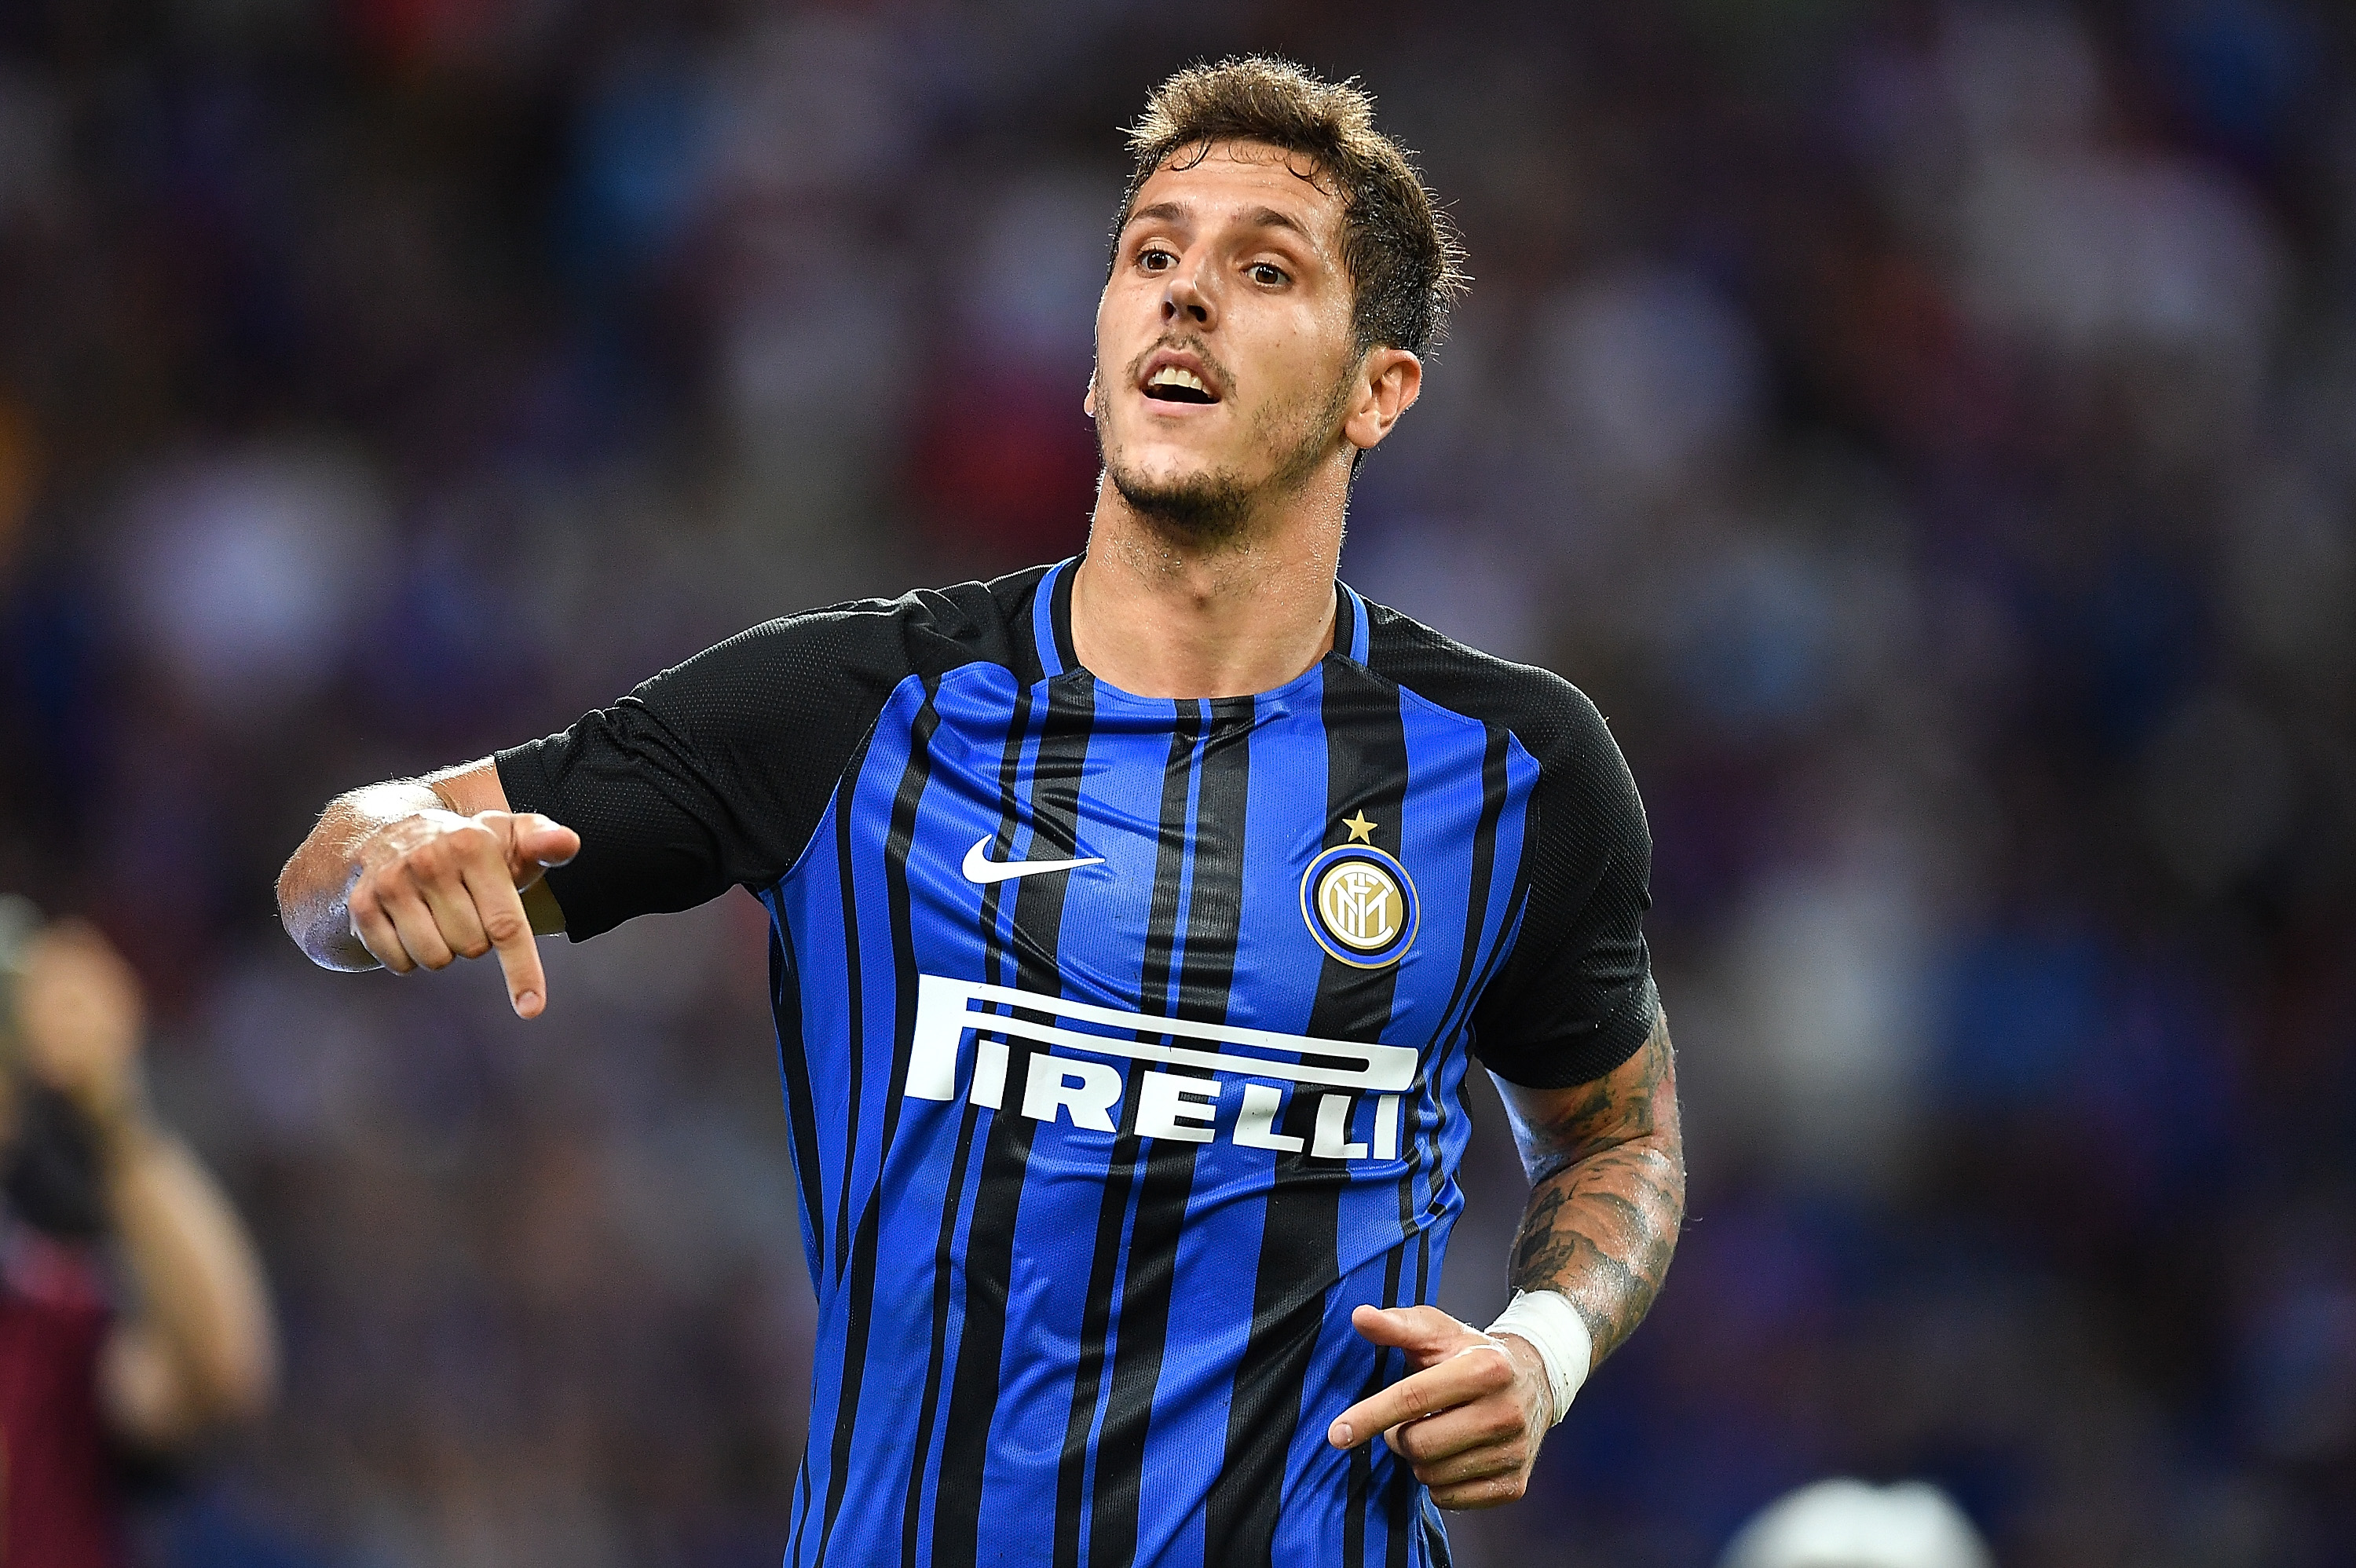 Jovetic bids farewell to Inter: “Thank you and good luck”